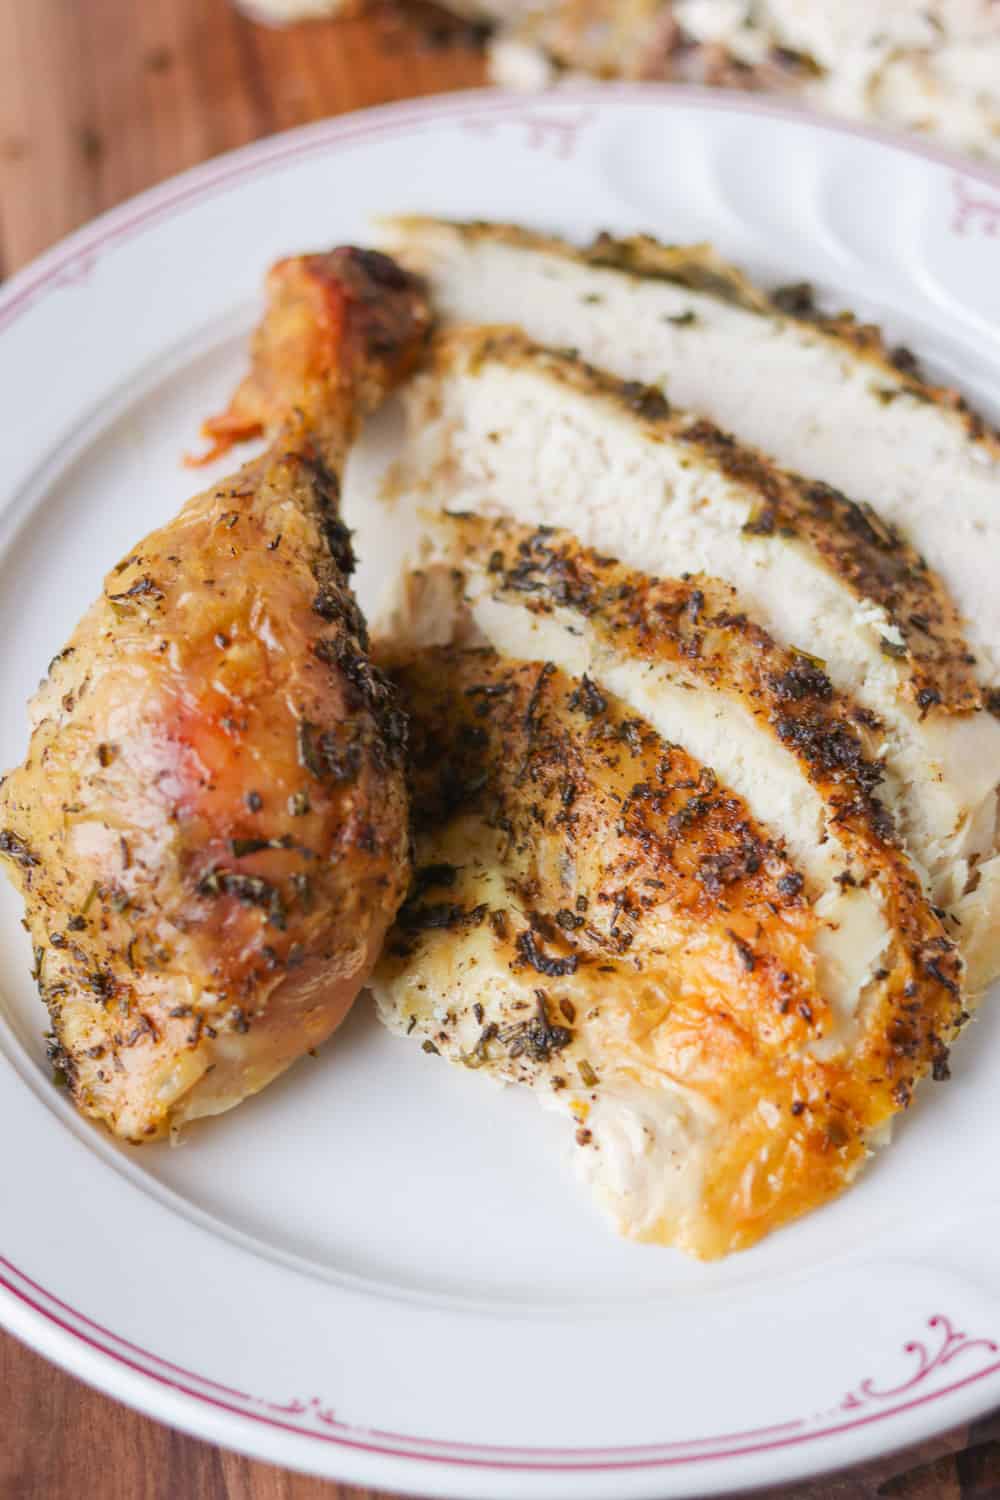 Slices and a drumstick of a Lemon Herb Roasted Chicken.